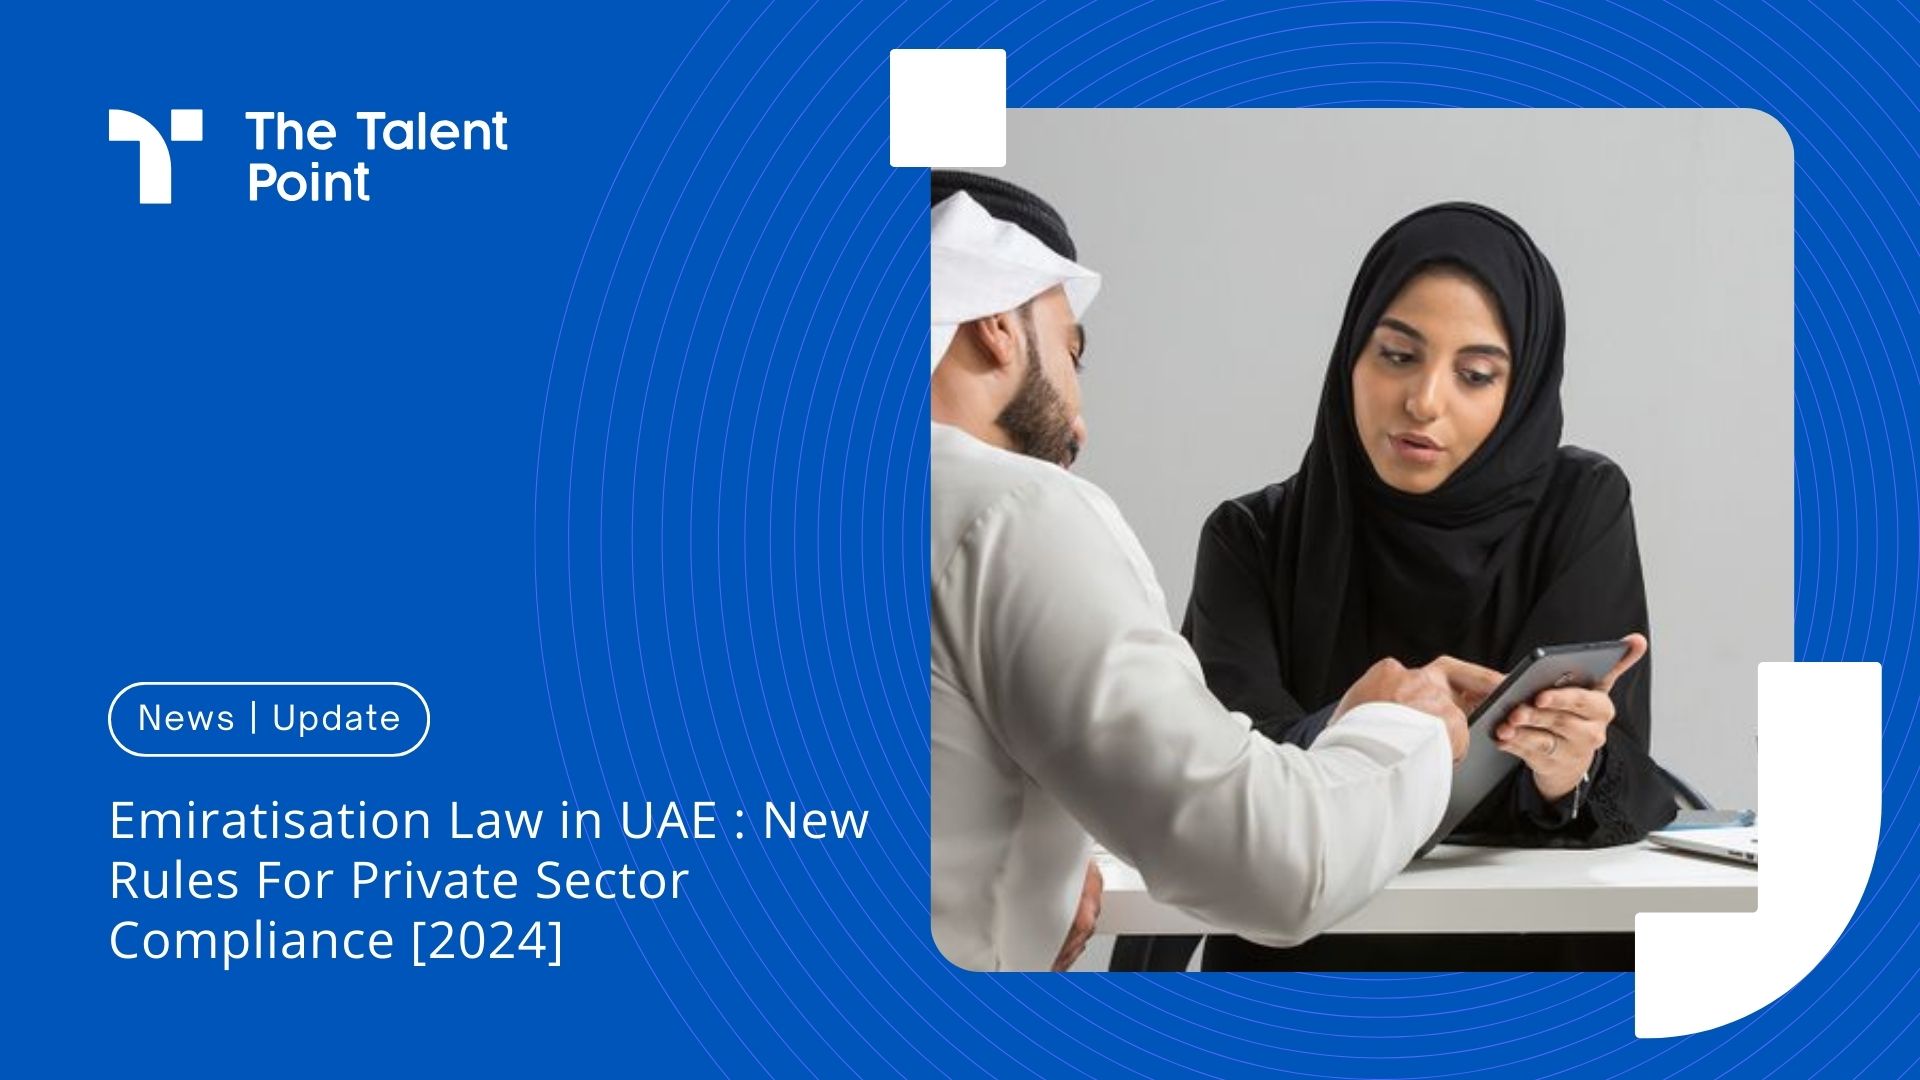 Emiratisation Law in UAE : New Rules For Private Sector Compliance [2024]